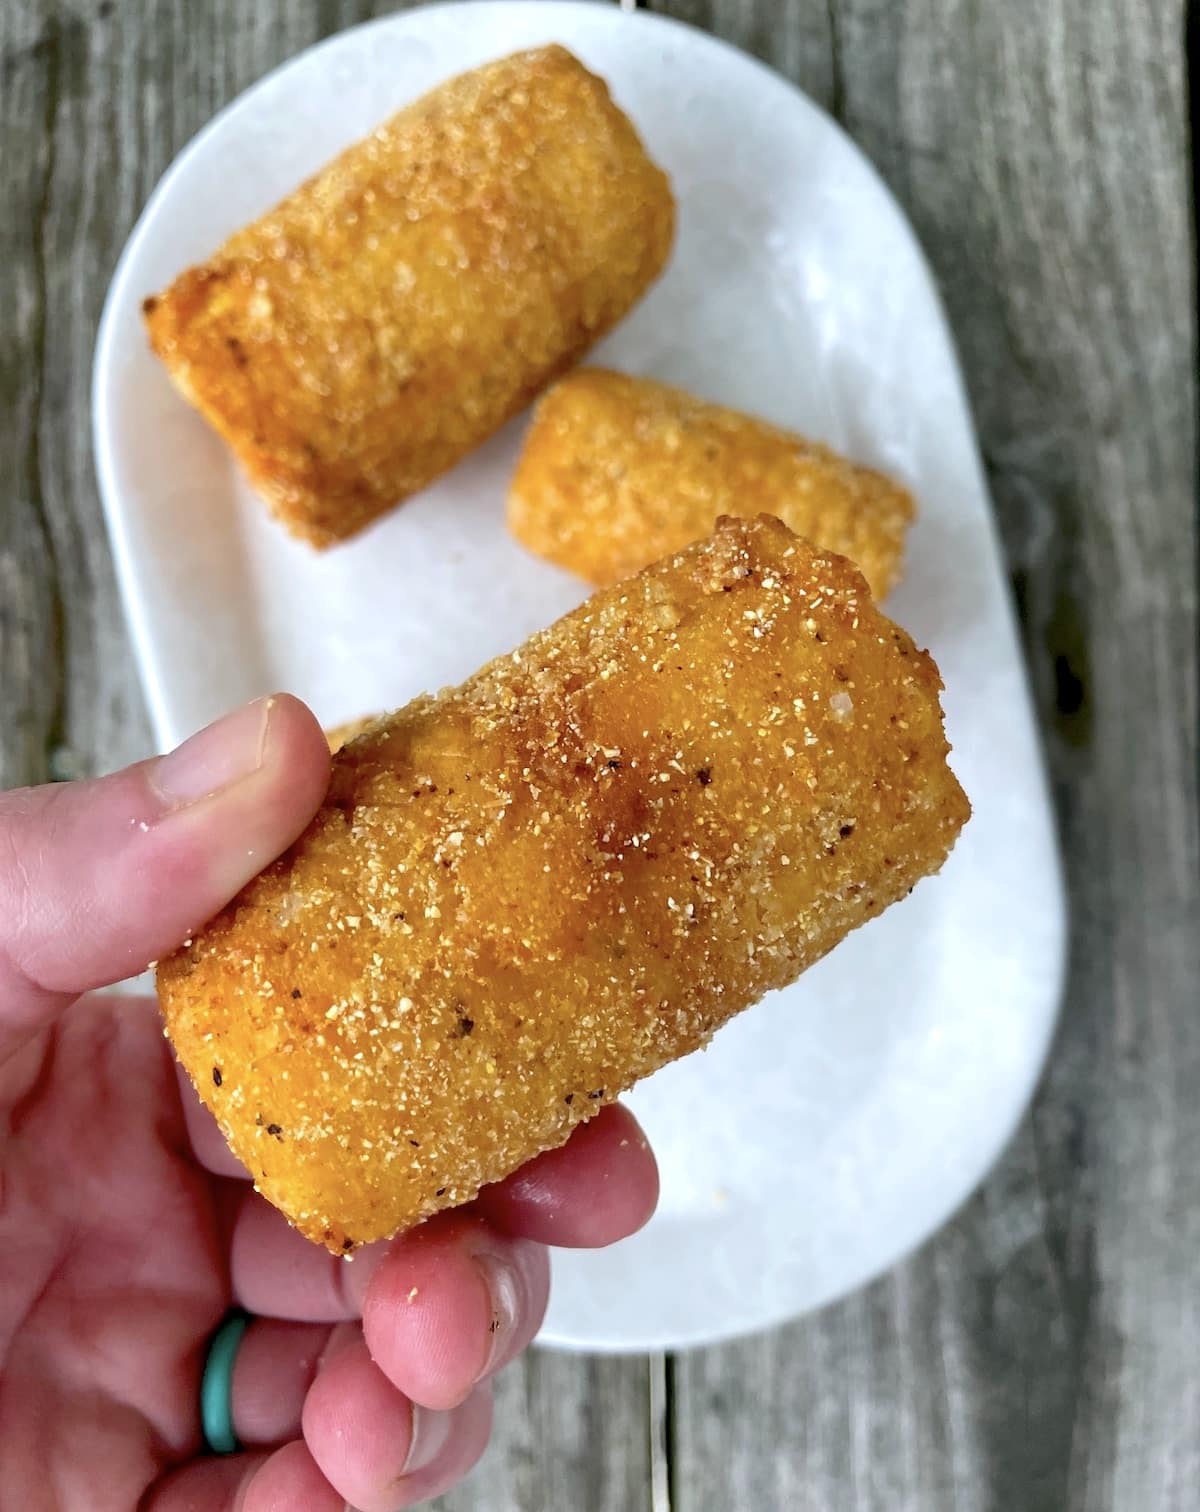 A hand holding a piece of fried corn on the cob over a white plate with two other pieces on it.